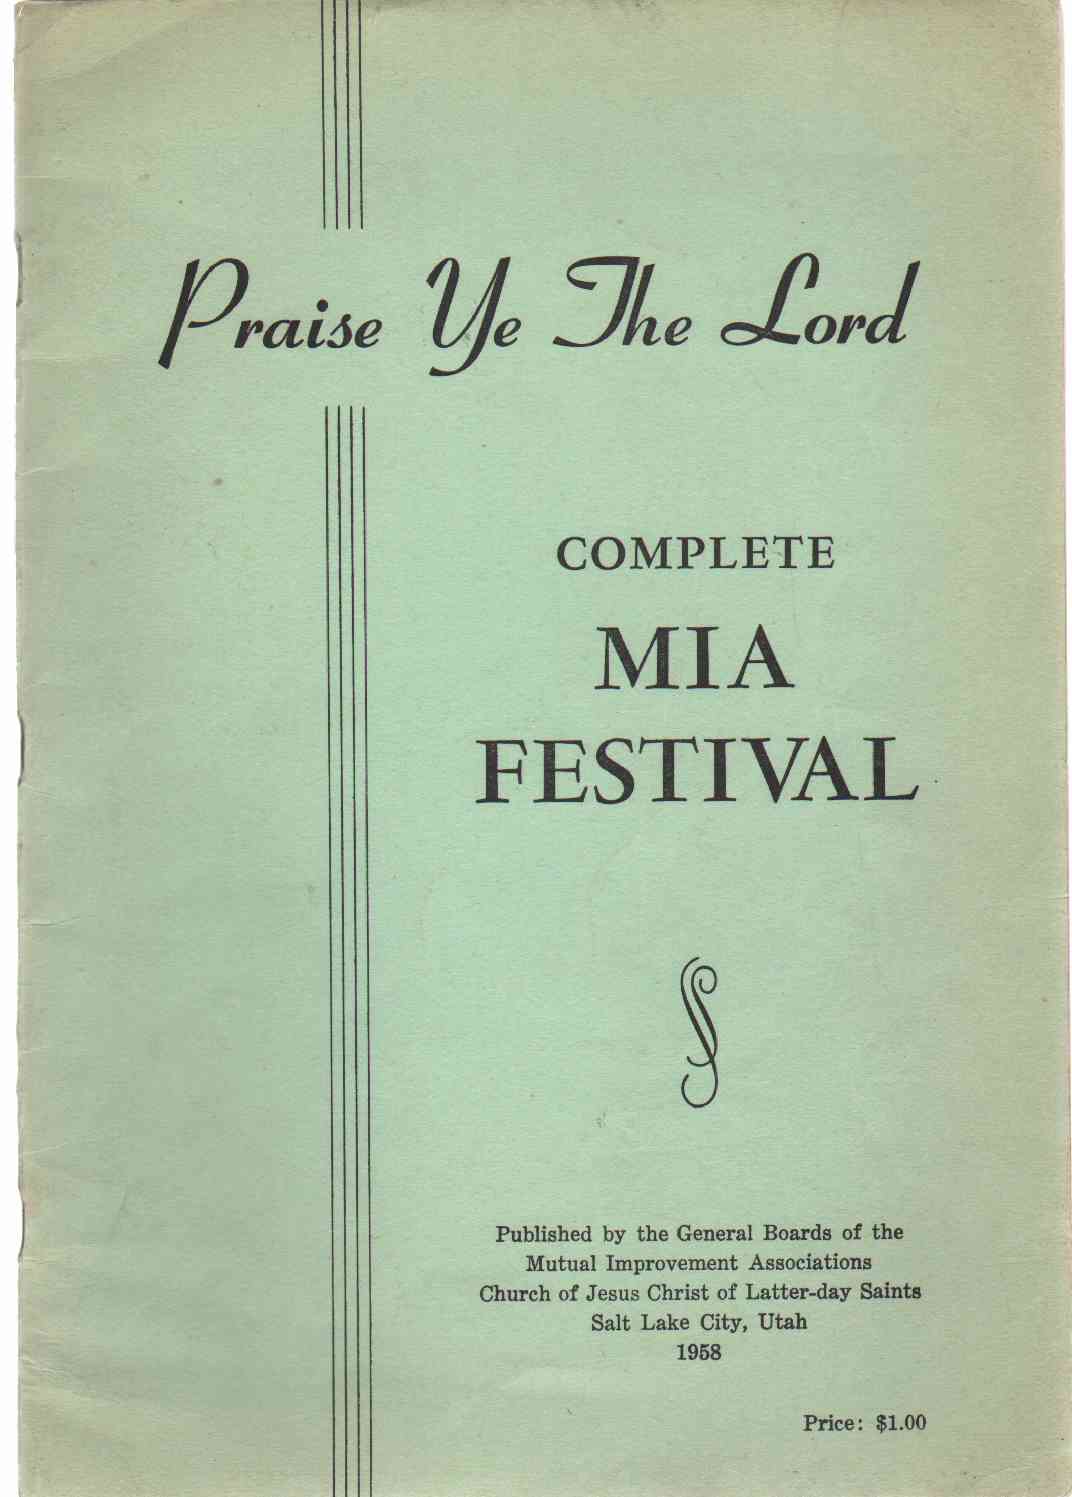 Image for PRAISE YE THE LORD Complete Mia Festival Music, Speech, Drama, Dance